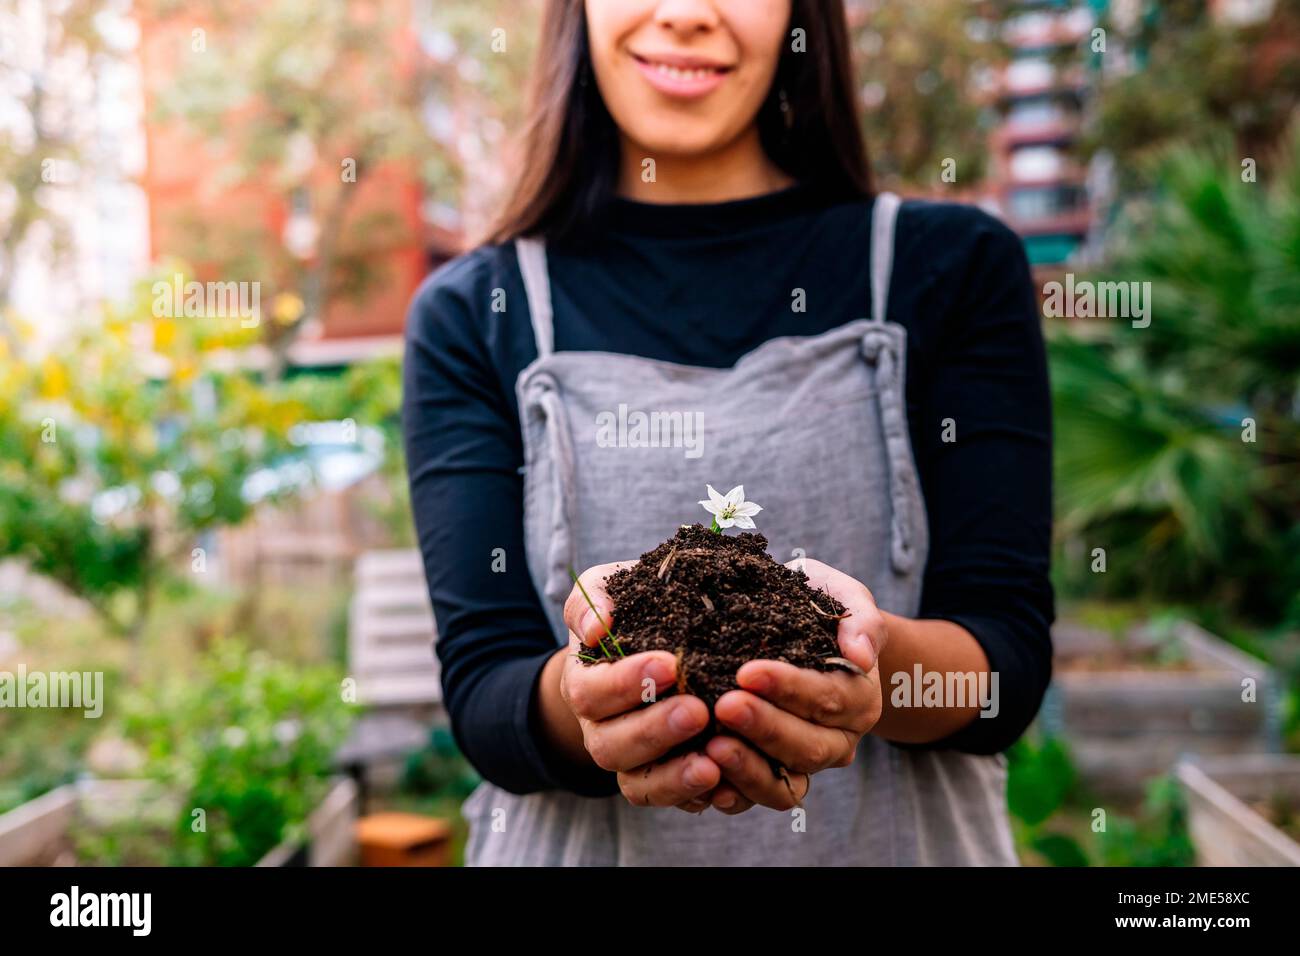 Smiling woman holding dirt with small flower in cupped hands Stock Photo